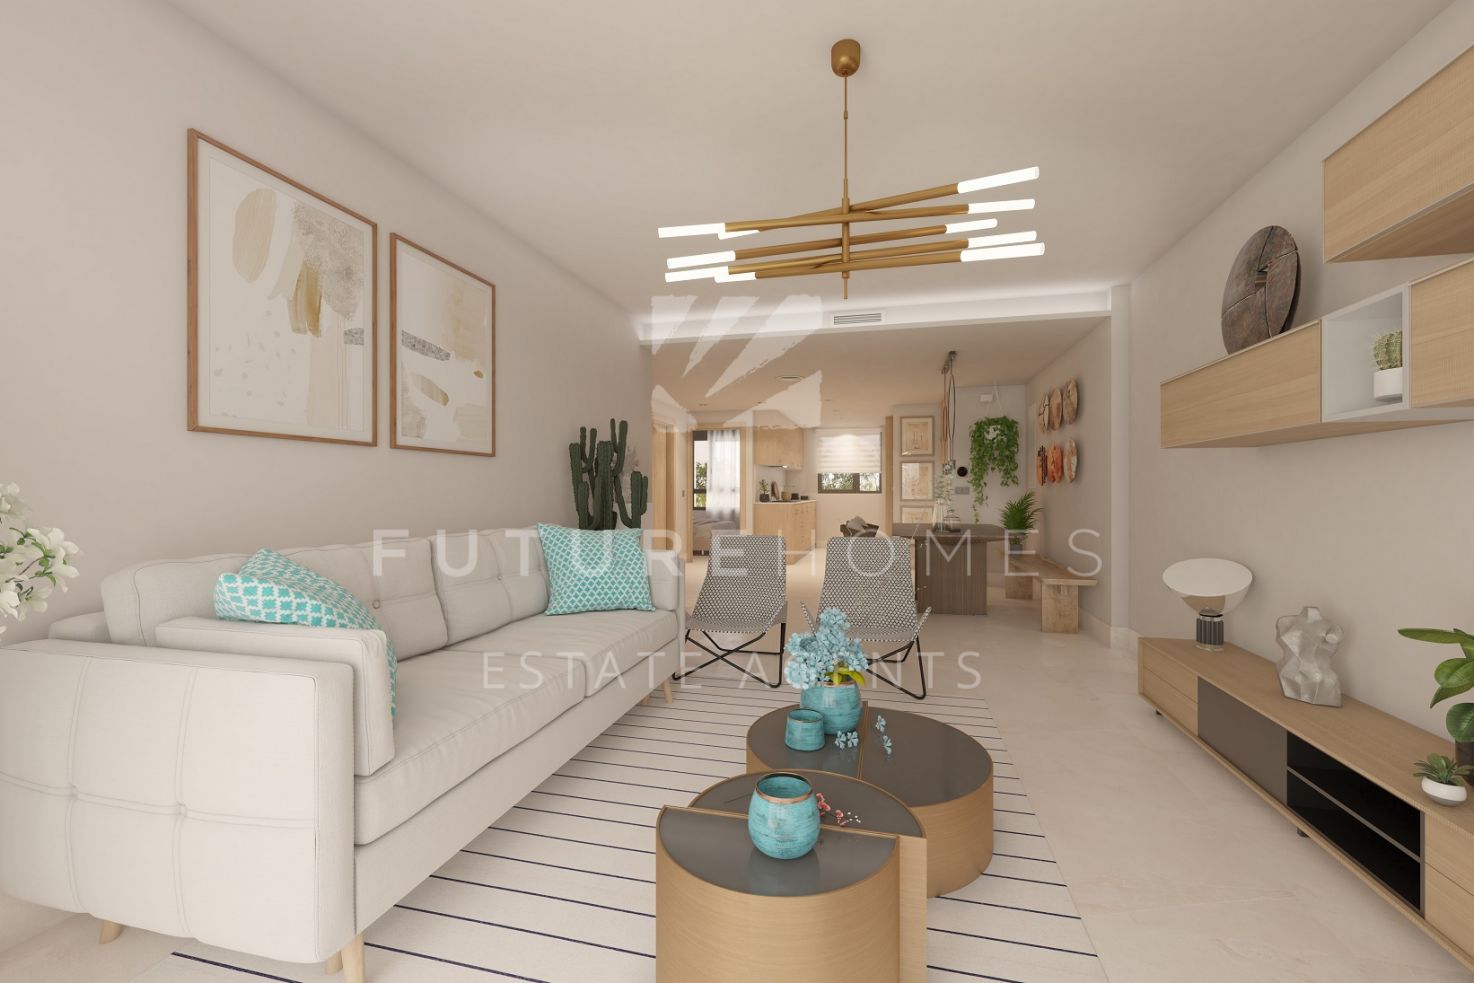 New modern apartments for sale on Casares Costa with open sea views